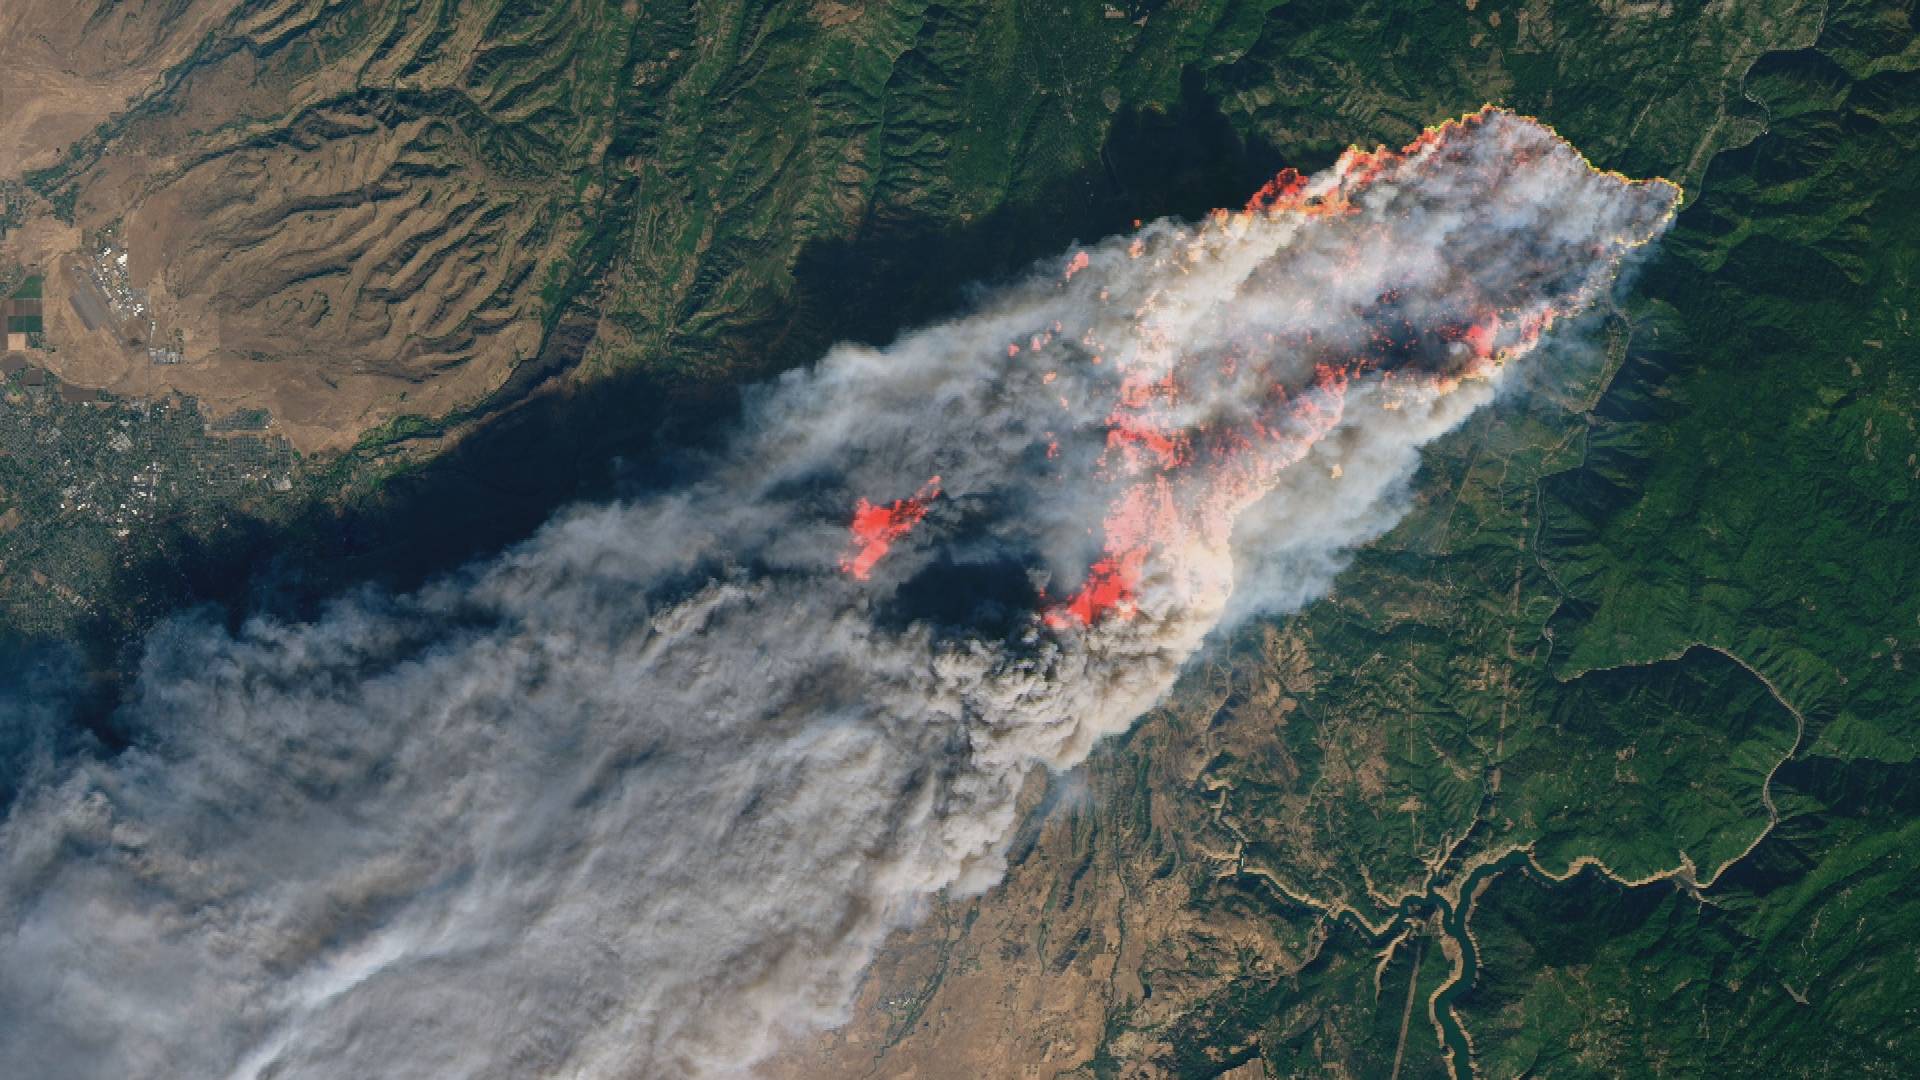 A satellite image shows the Camp Fire - driven by high winds after it was sparked by PG&E equipment - as it consumes the town of Paradise in Nov., 2018. The blaze remains the deadliest and most destructive in California history.